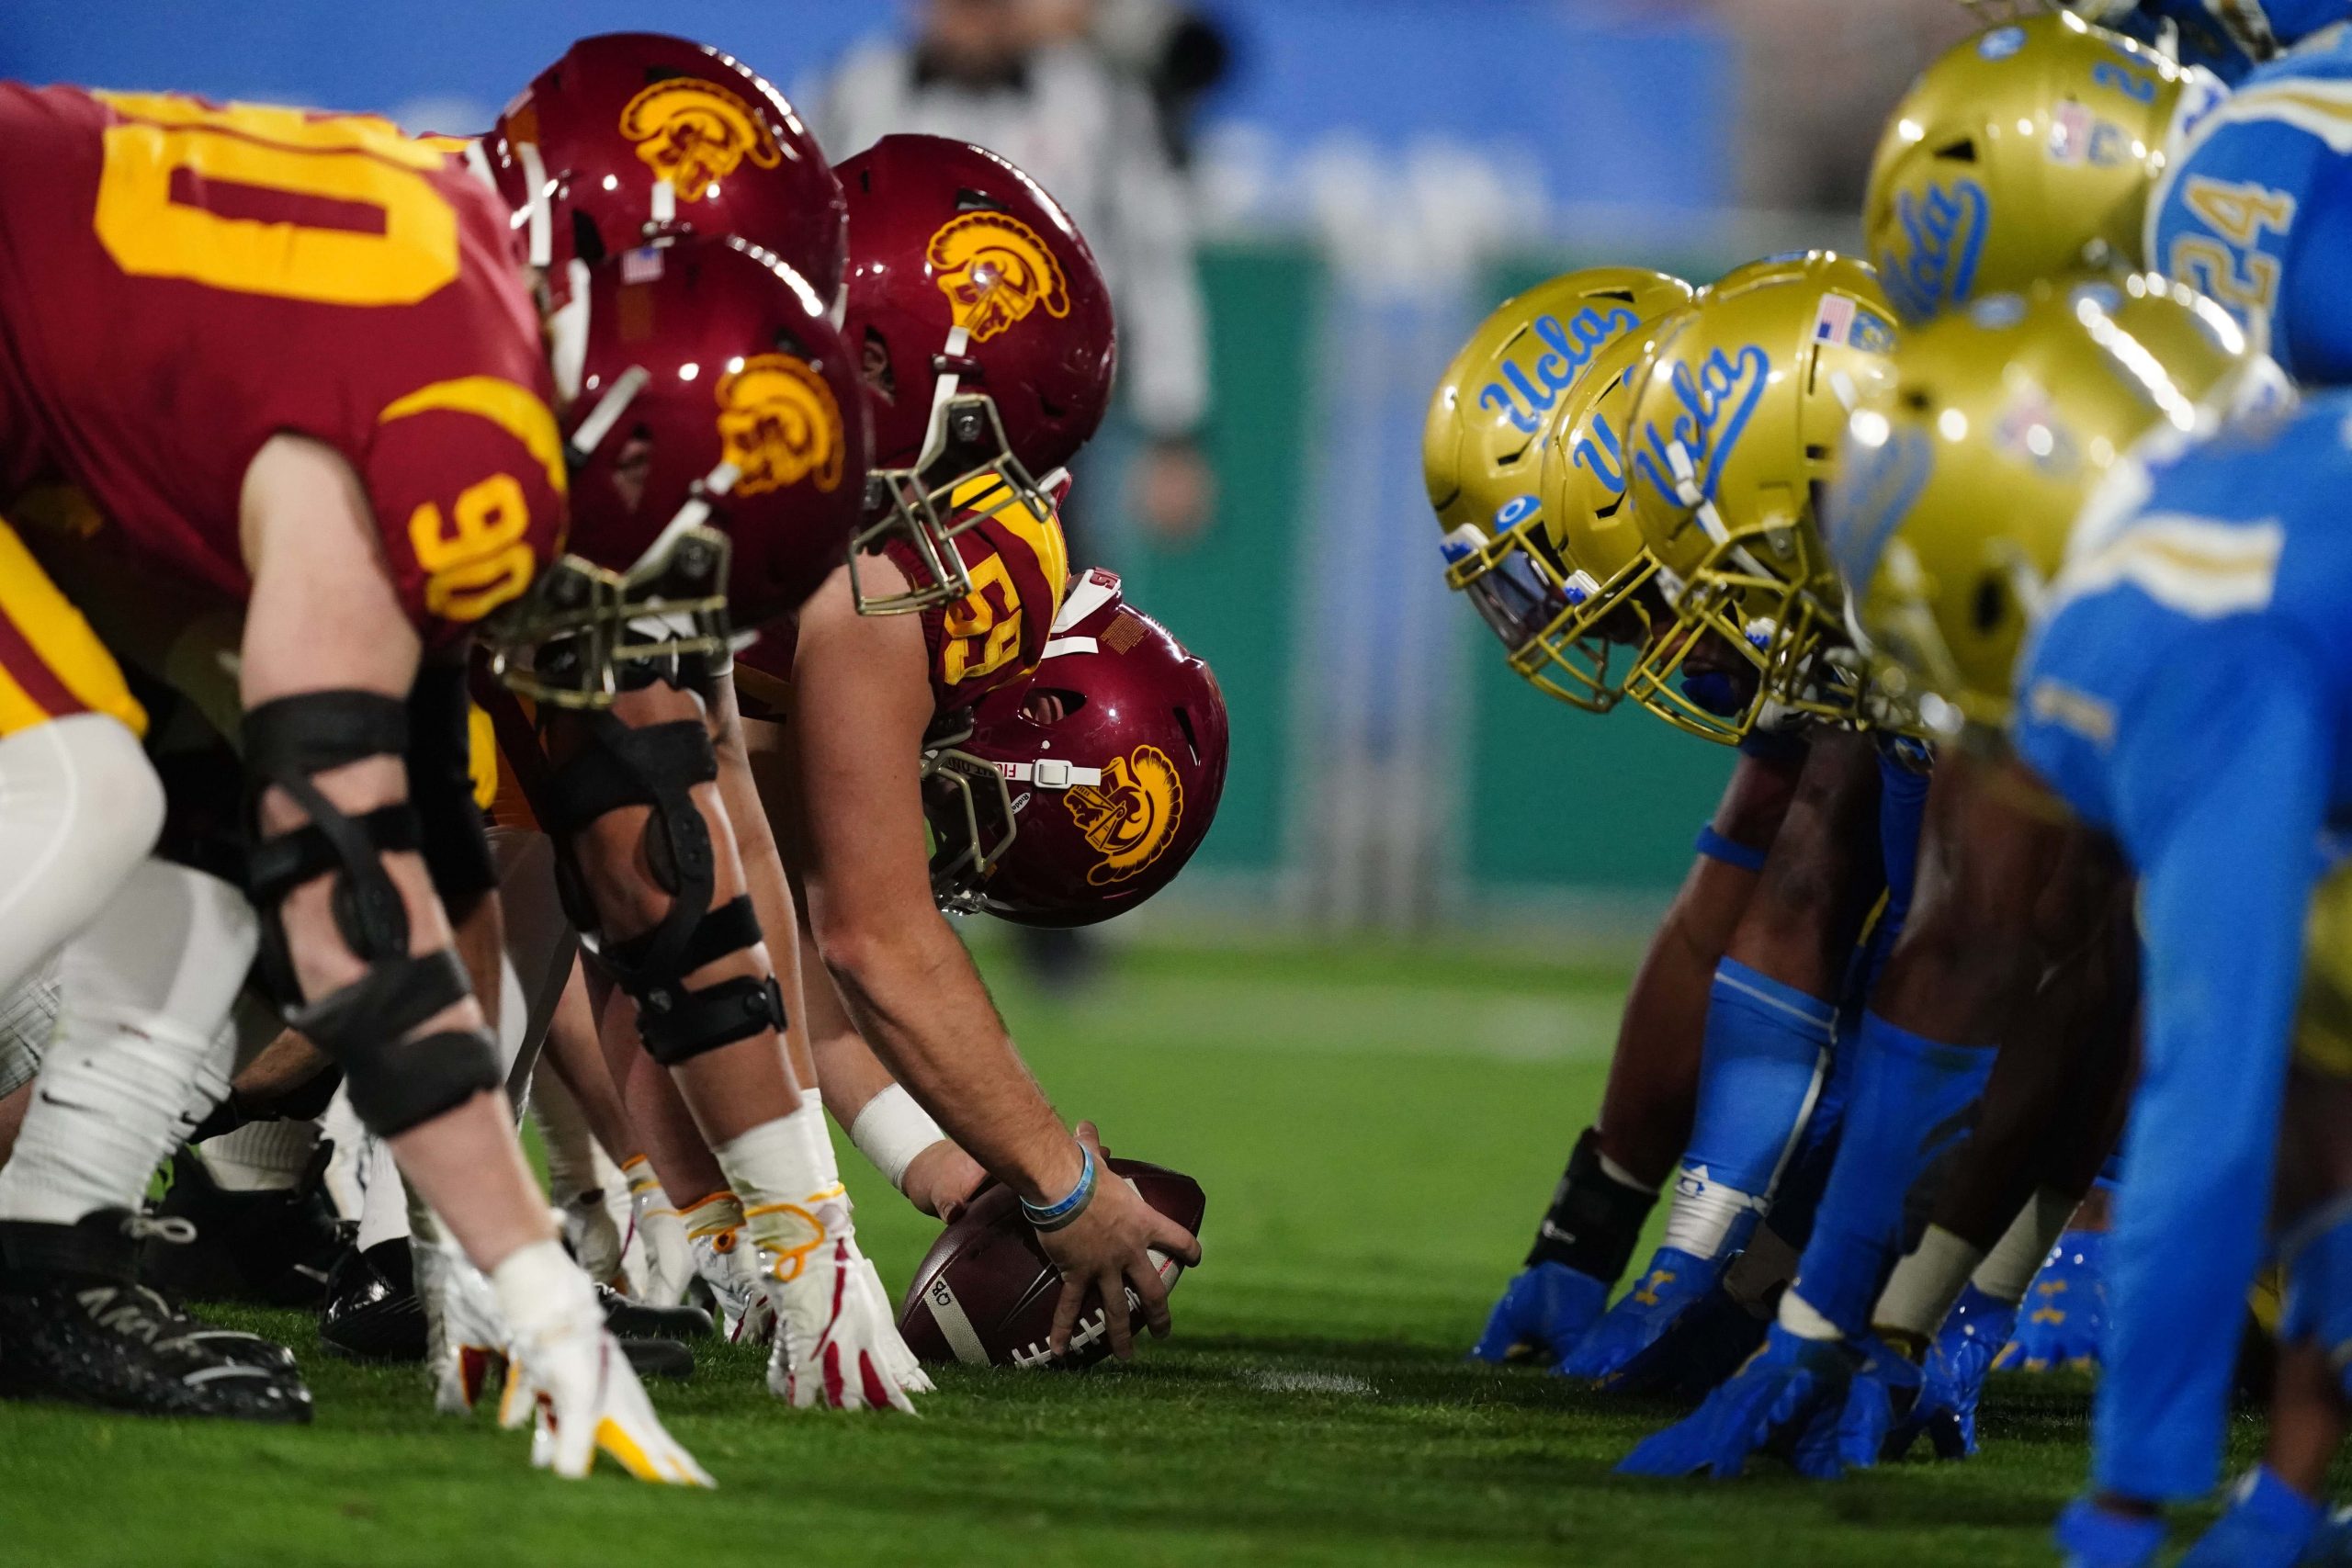 Pac-12 Powers USC, UCLA Will Join The Big Ten in 2024